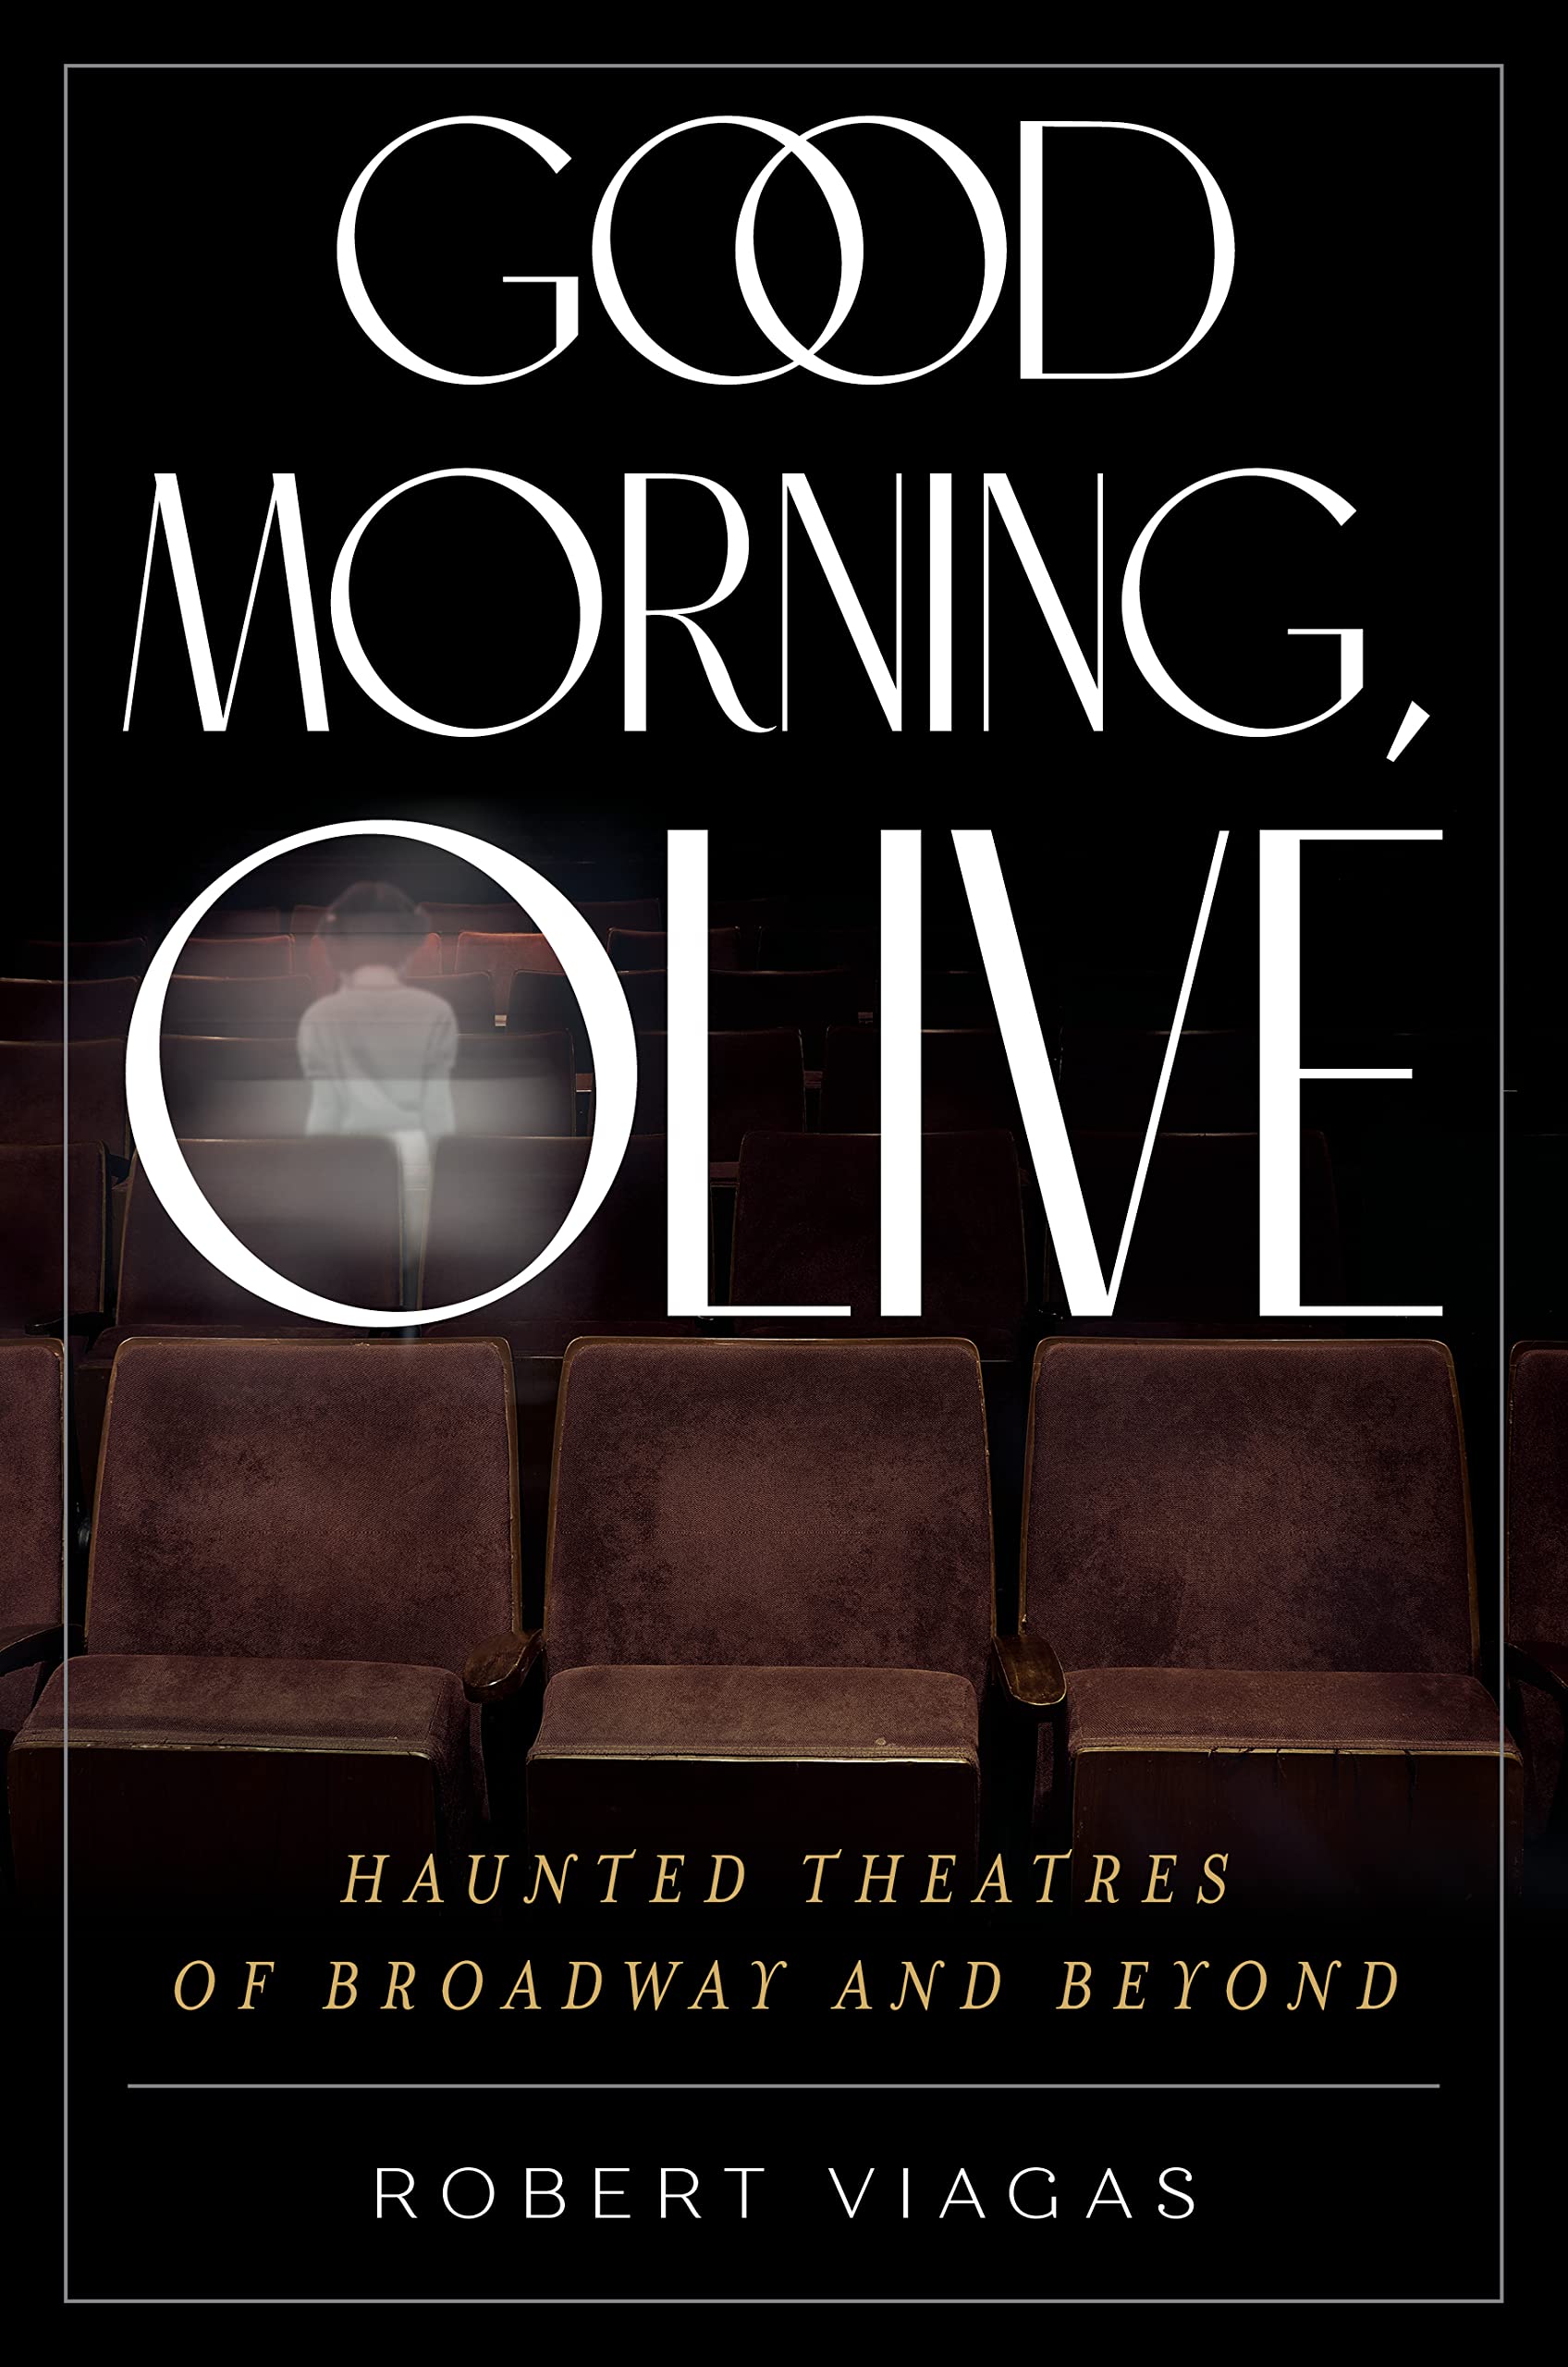 An image of the cover of the book, Good Morning Olive, The Haunted Theaters of Broadway and Beyond by Robert Viagas.